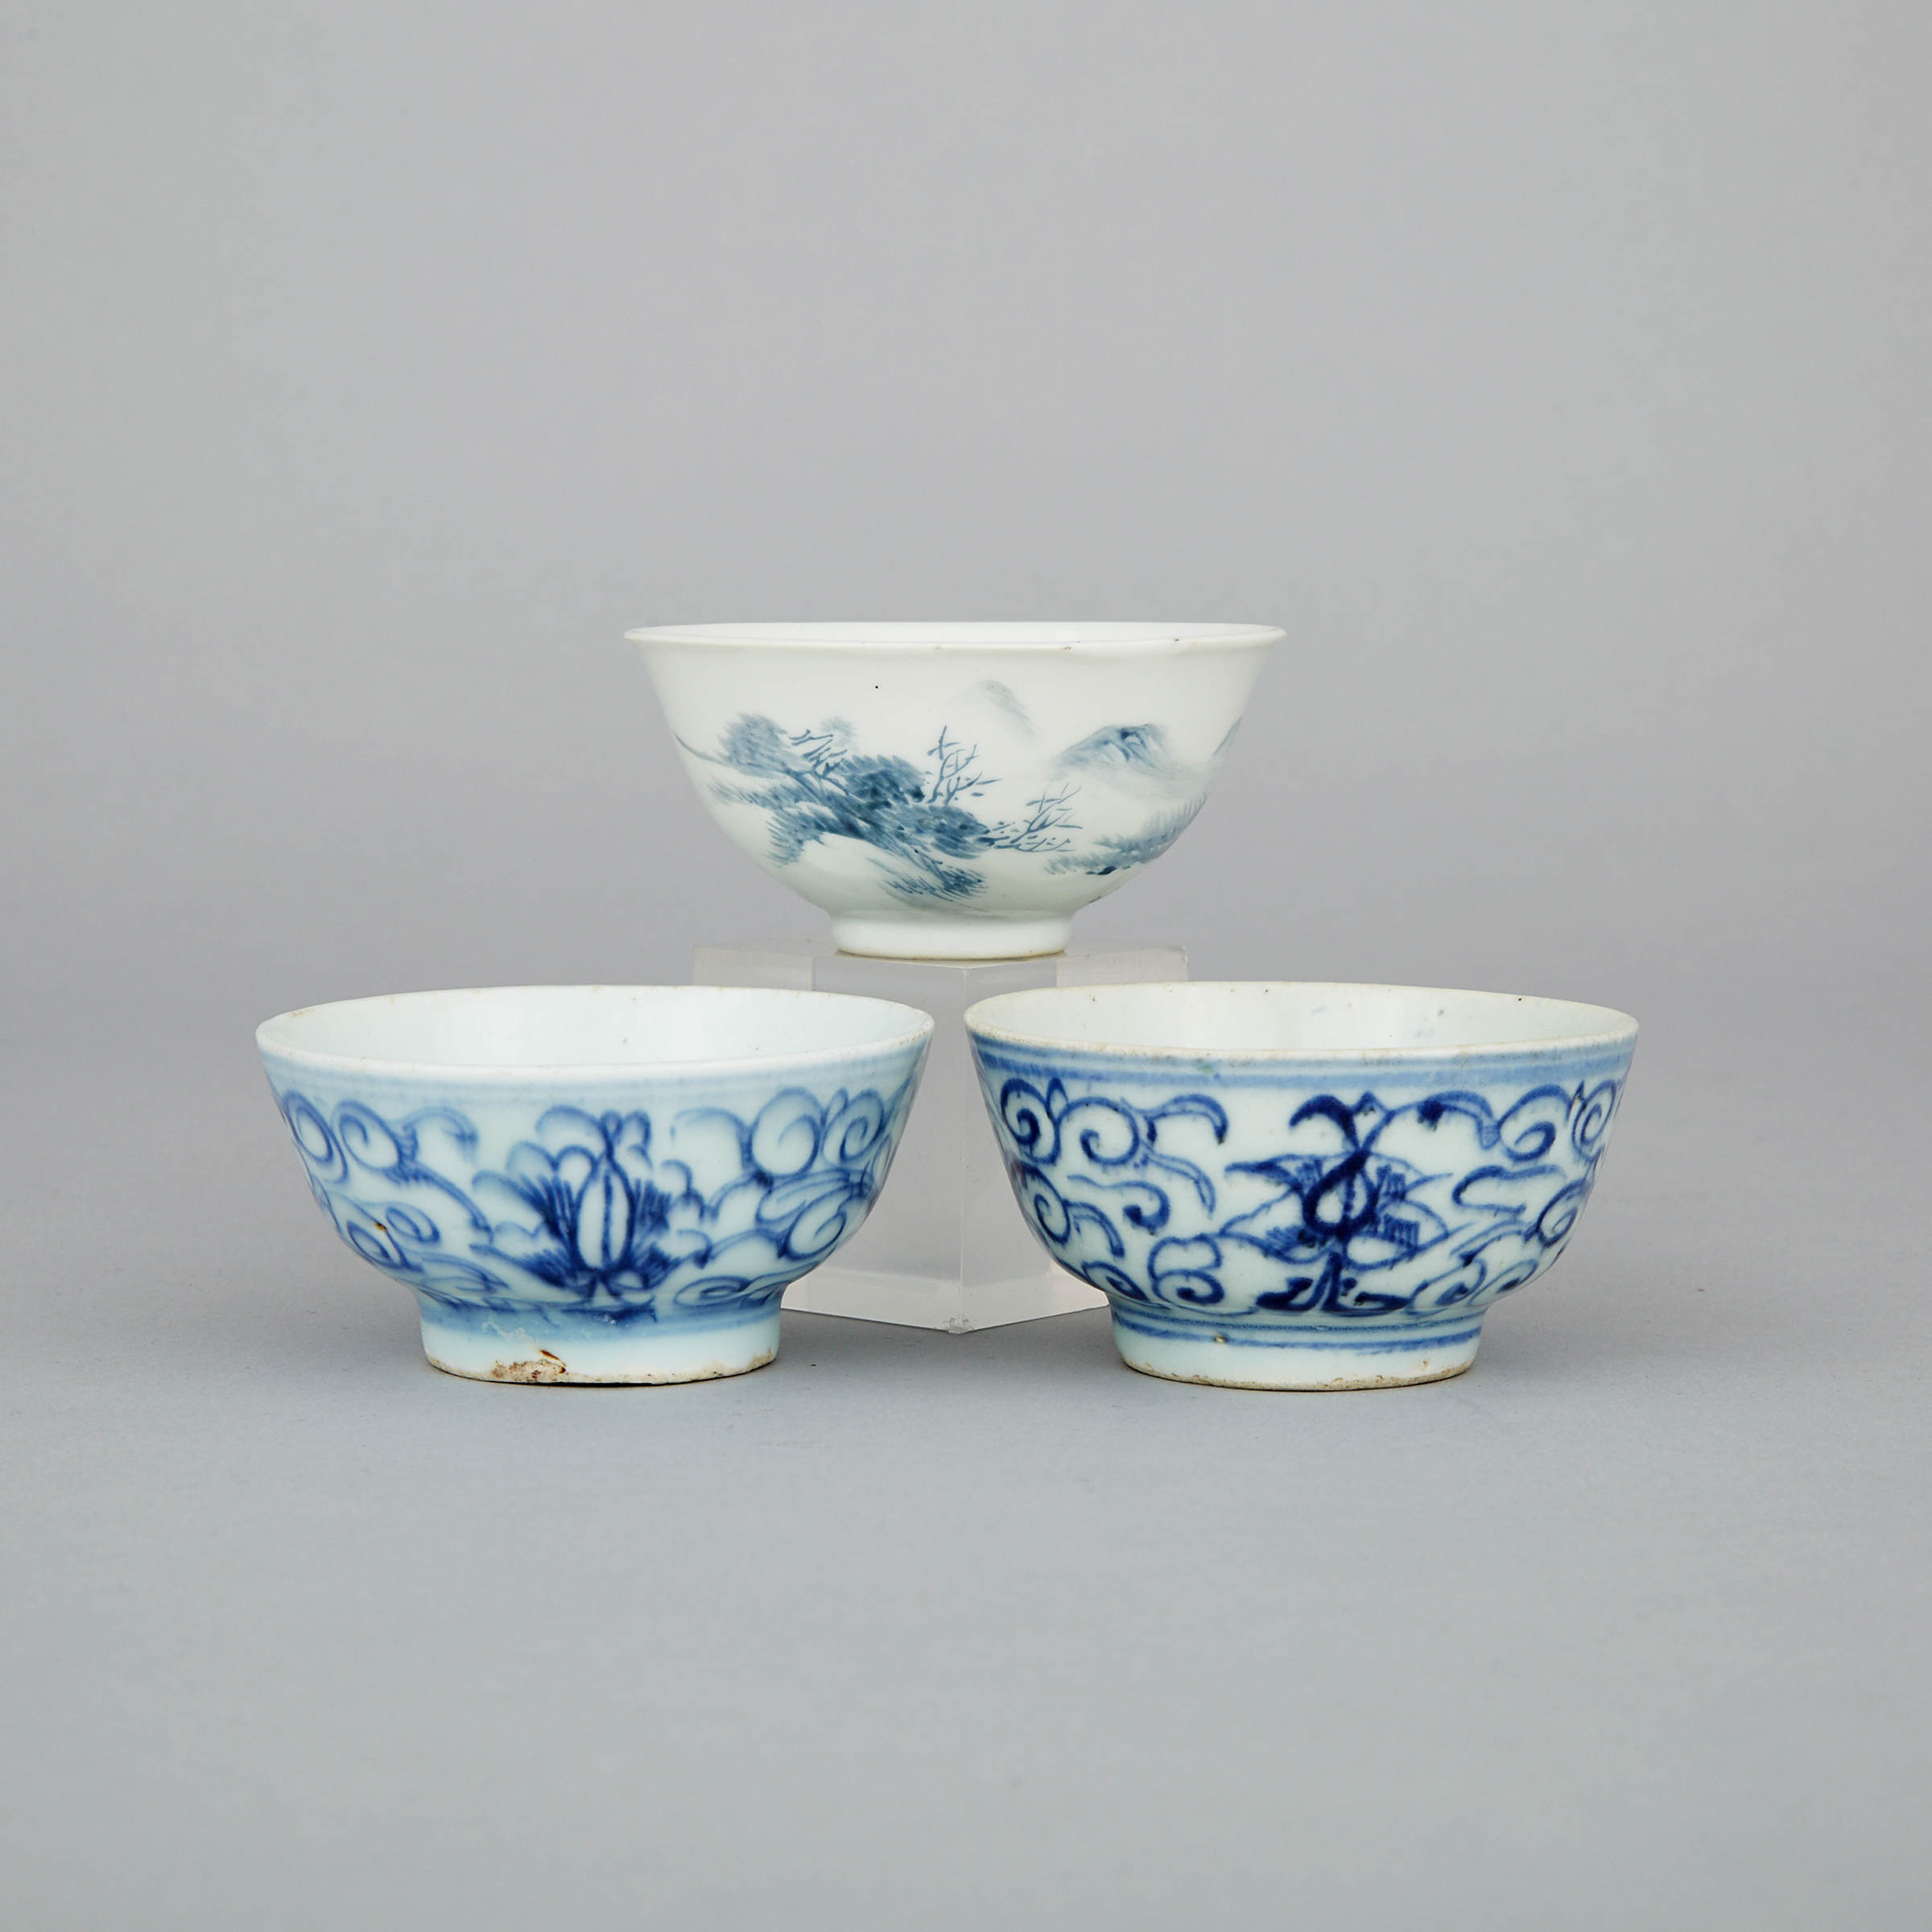 A Group of Three Porcelain Cups, Late 19th/Early 20th Century